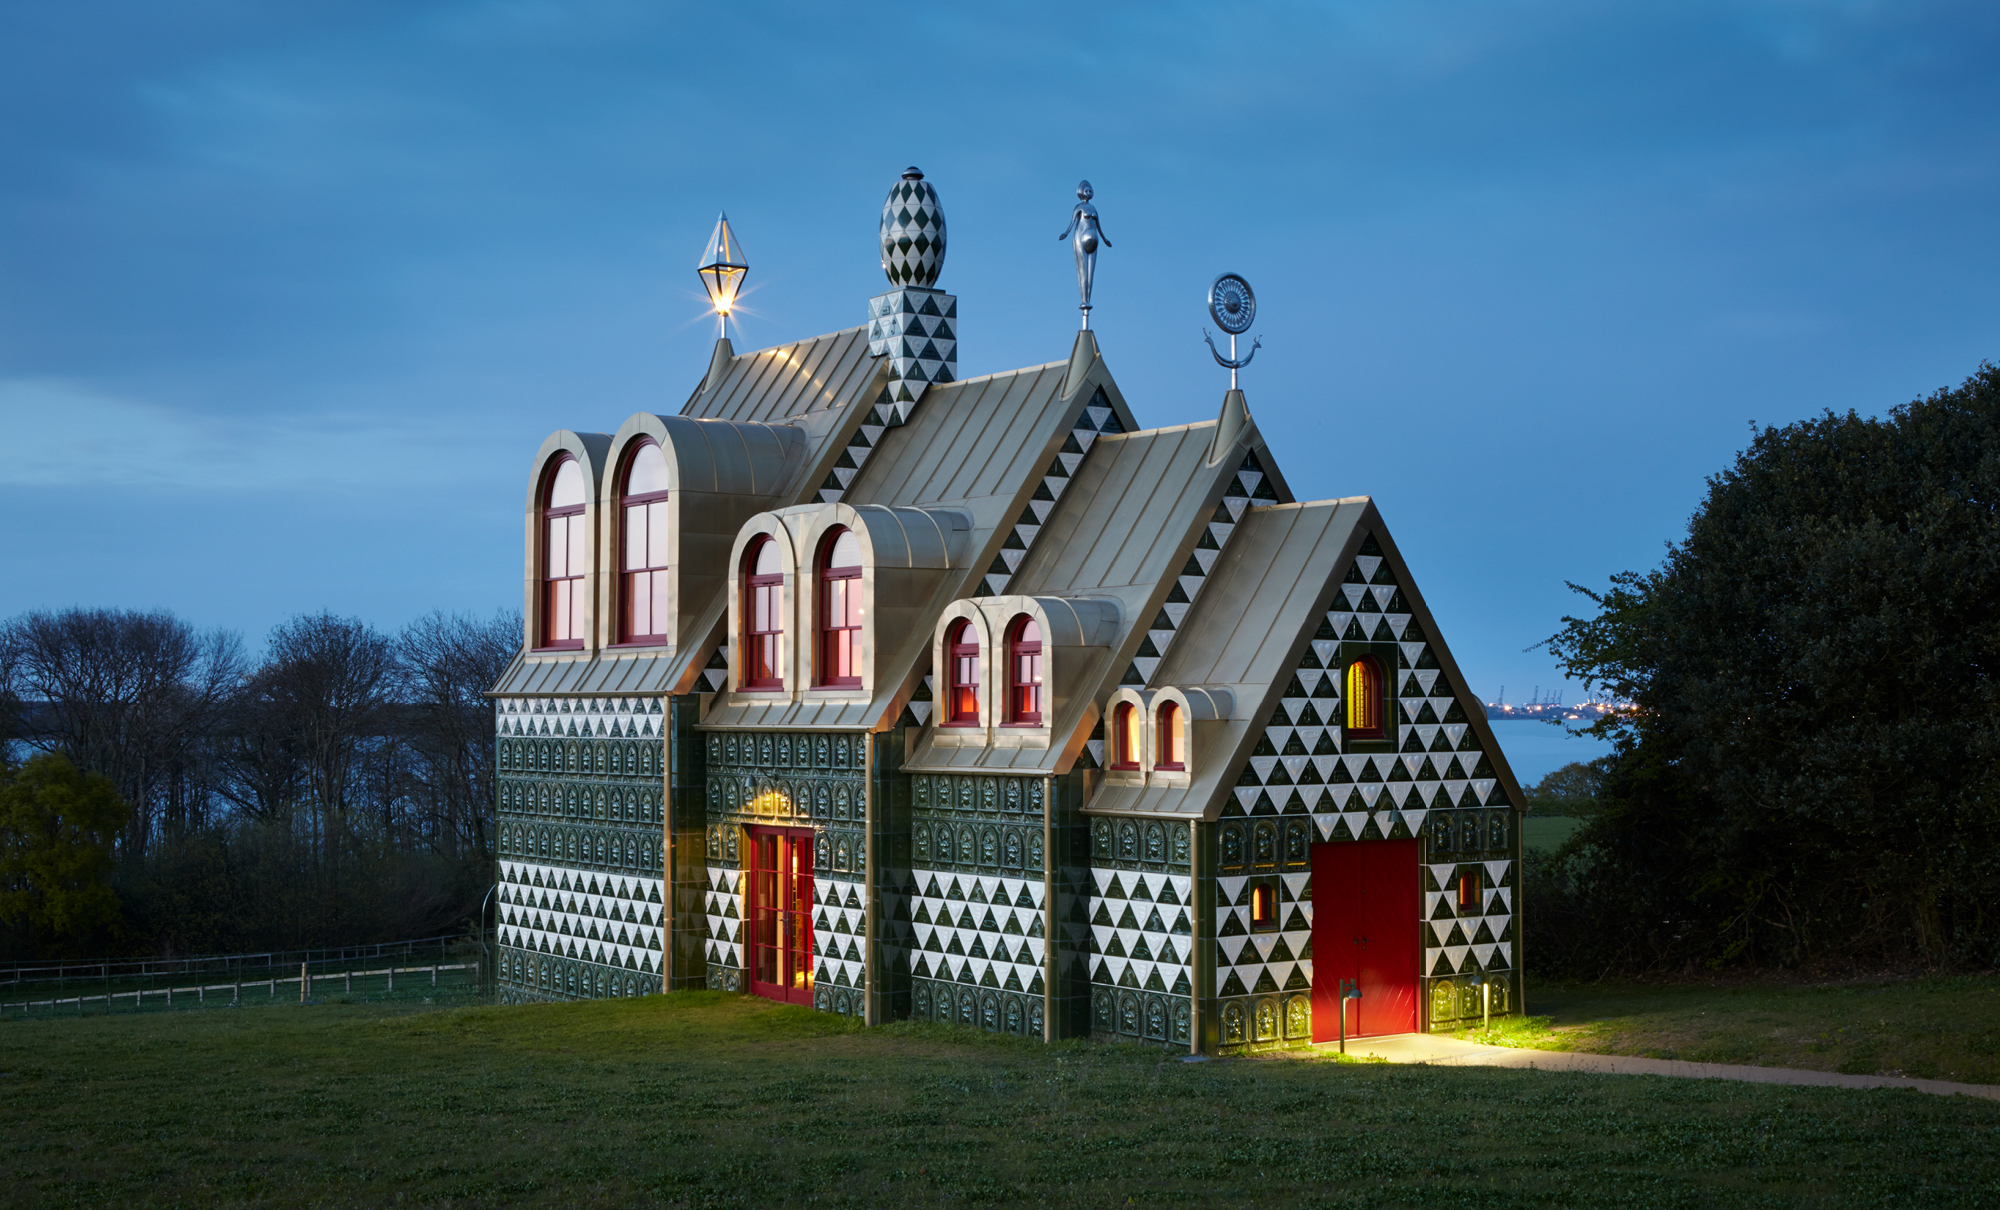 A House for Essex, Grayson Perry & Charles Holland (FAT), Wrabness, Essex, England